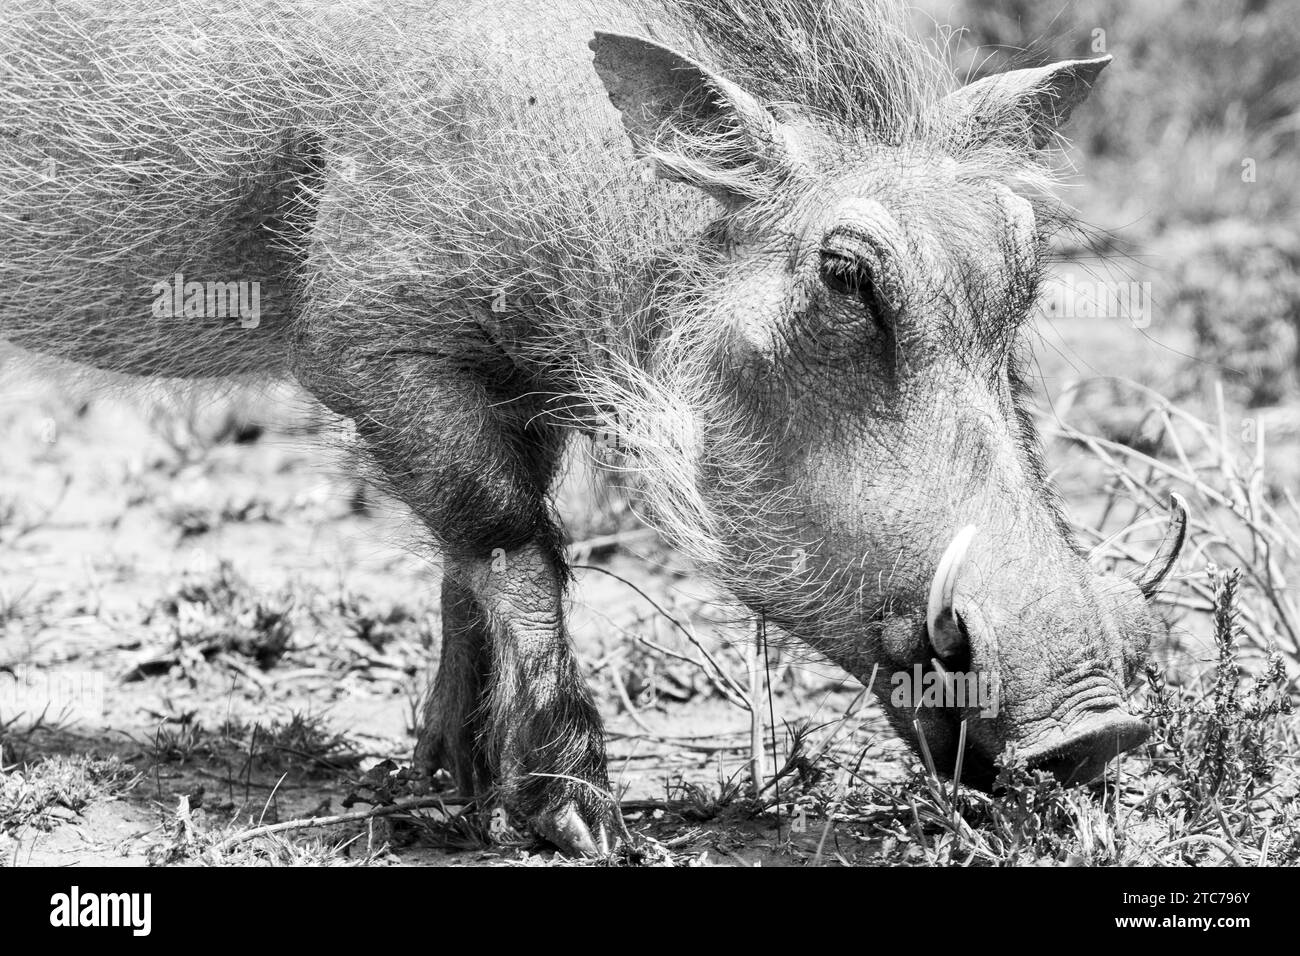 Black and white image of a Common Warthog (Phacochoerus africanus) close up on the head while foraging, Eastern Cape, South Africa Stock Photo